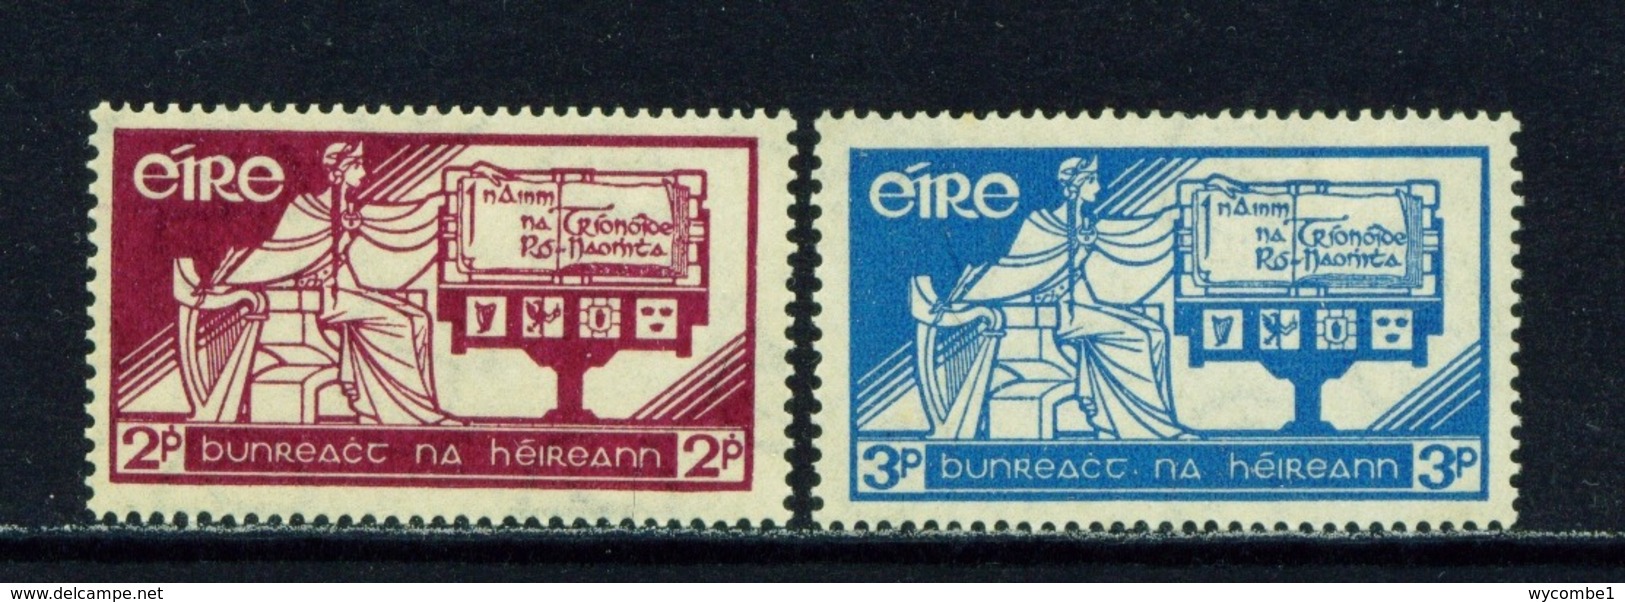 IRELAND  -  1937 Constitution Day Set  Mounted/Hinged Mint - Unused Stamps